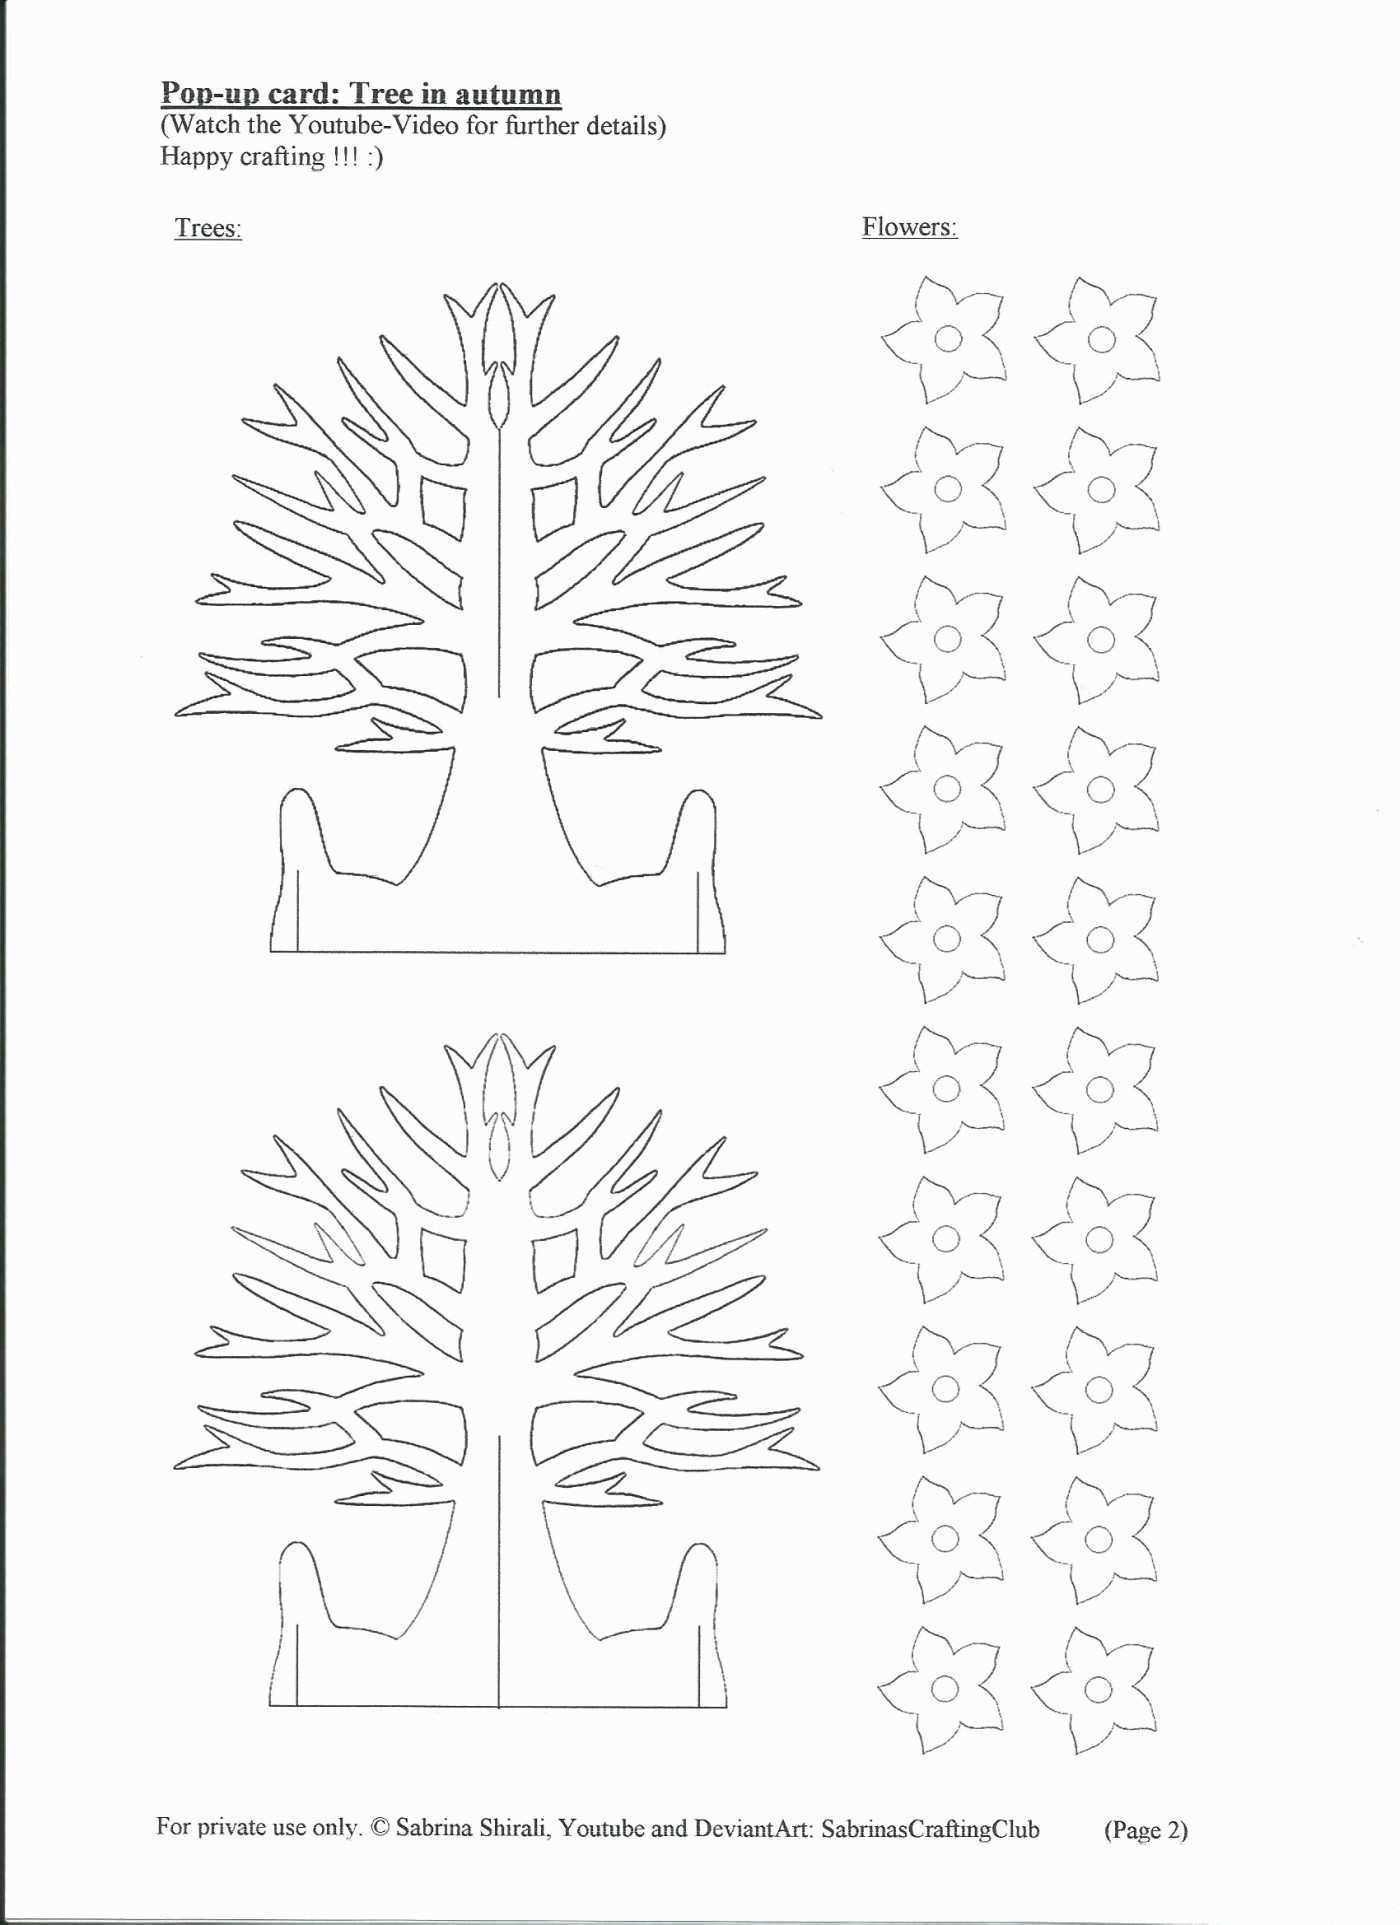 72 Free Printable Pop Up Card Templates Tree For Freepop Regarding Pop Up Card Templates Free Printable